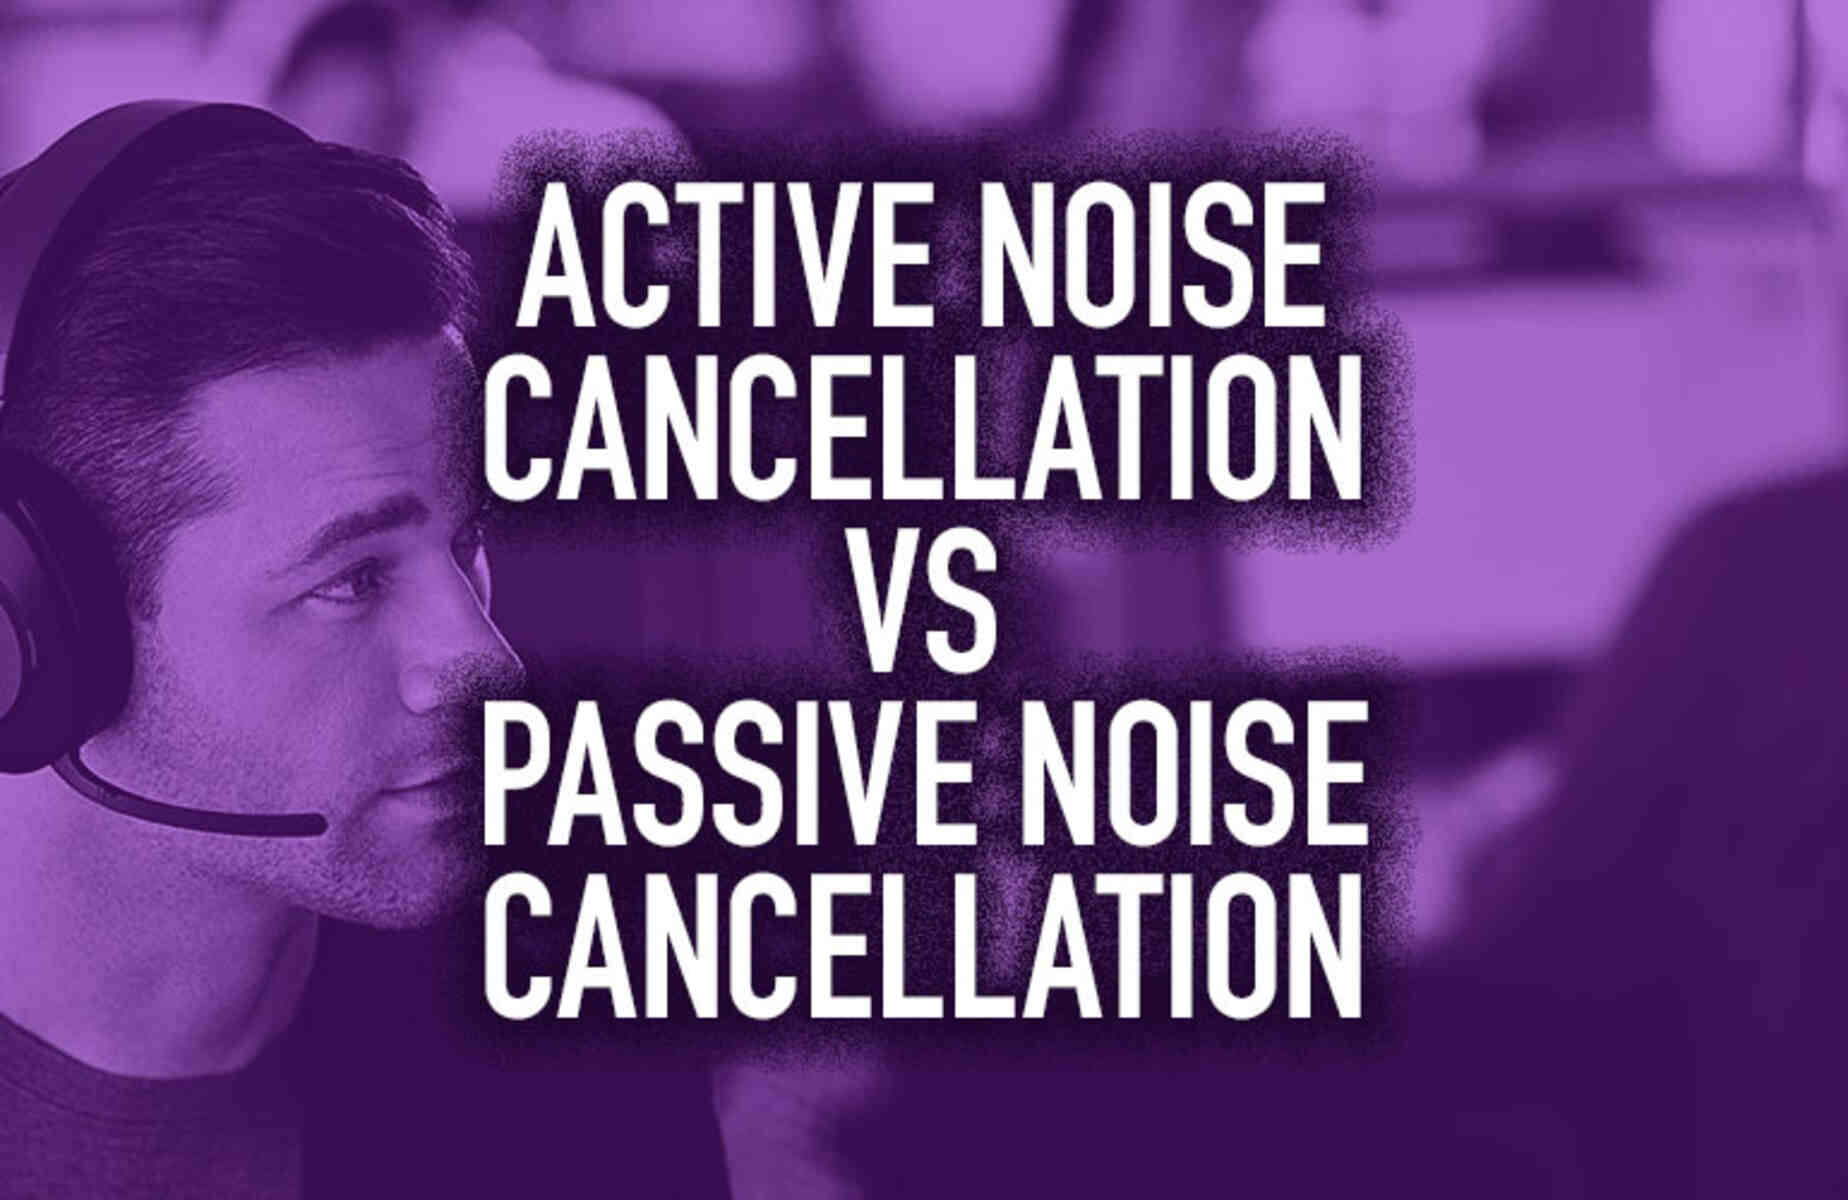 What Is Active Noise Cancellation And Passive Noise Cancellation